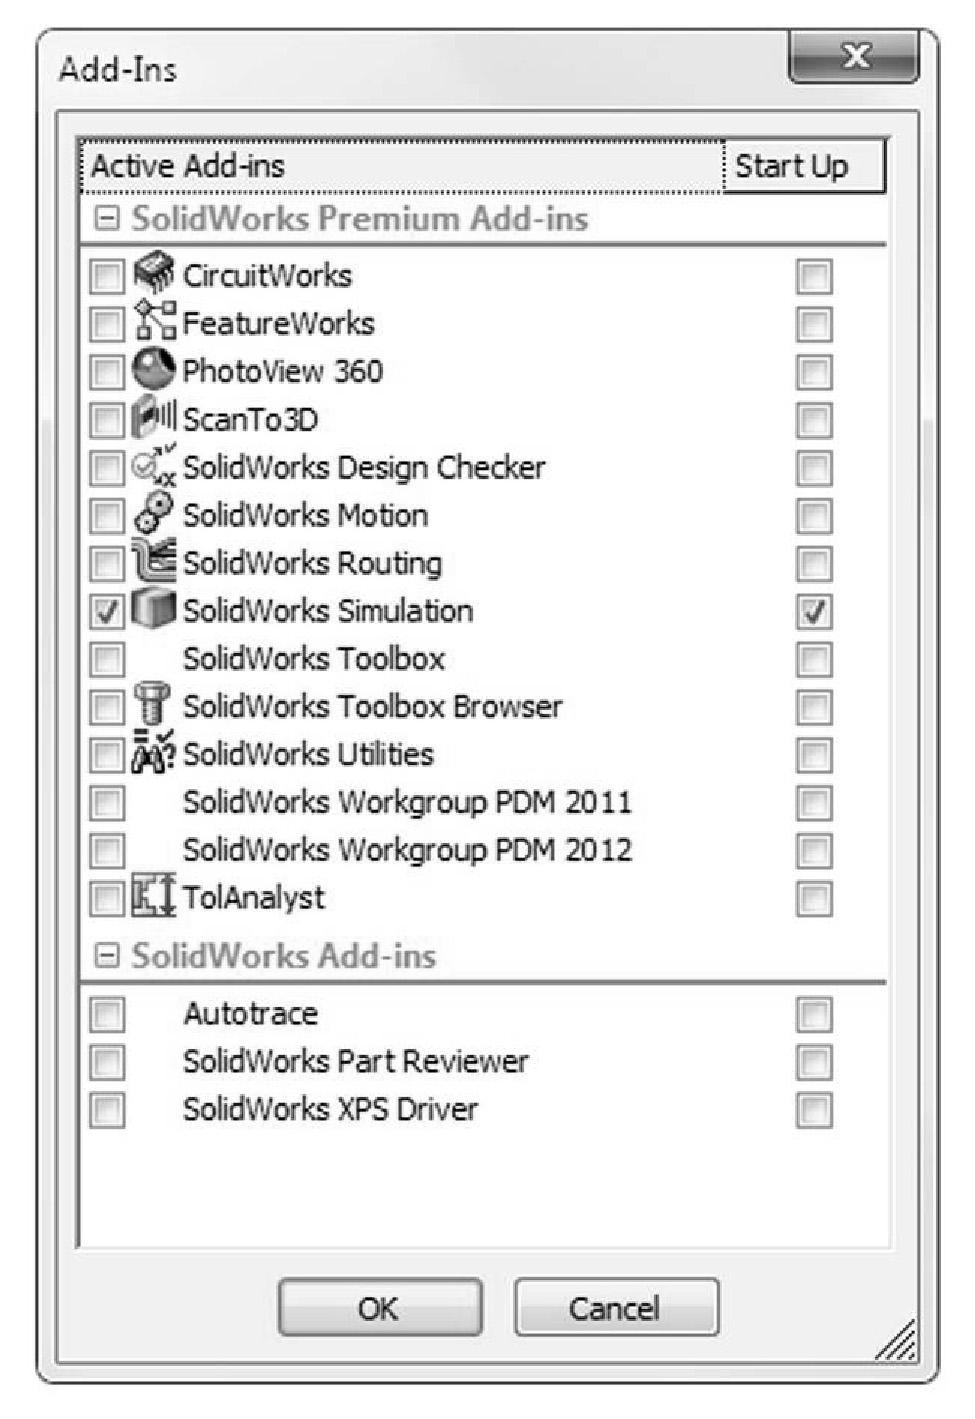 Procedure In SolidWorks, open the model file called HOLLOW PLATE. Verify that SolidWorks Simulation is selected in the Add-Ins list (Figure 2-2).